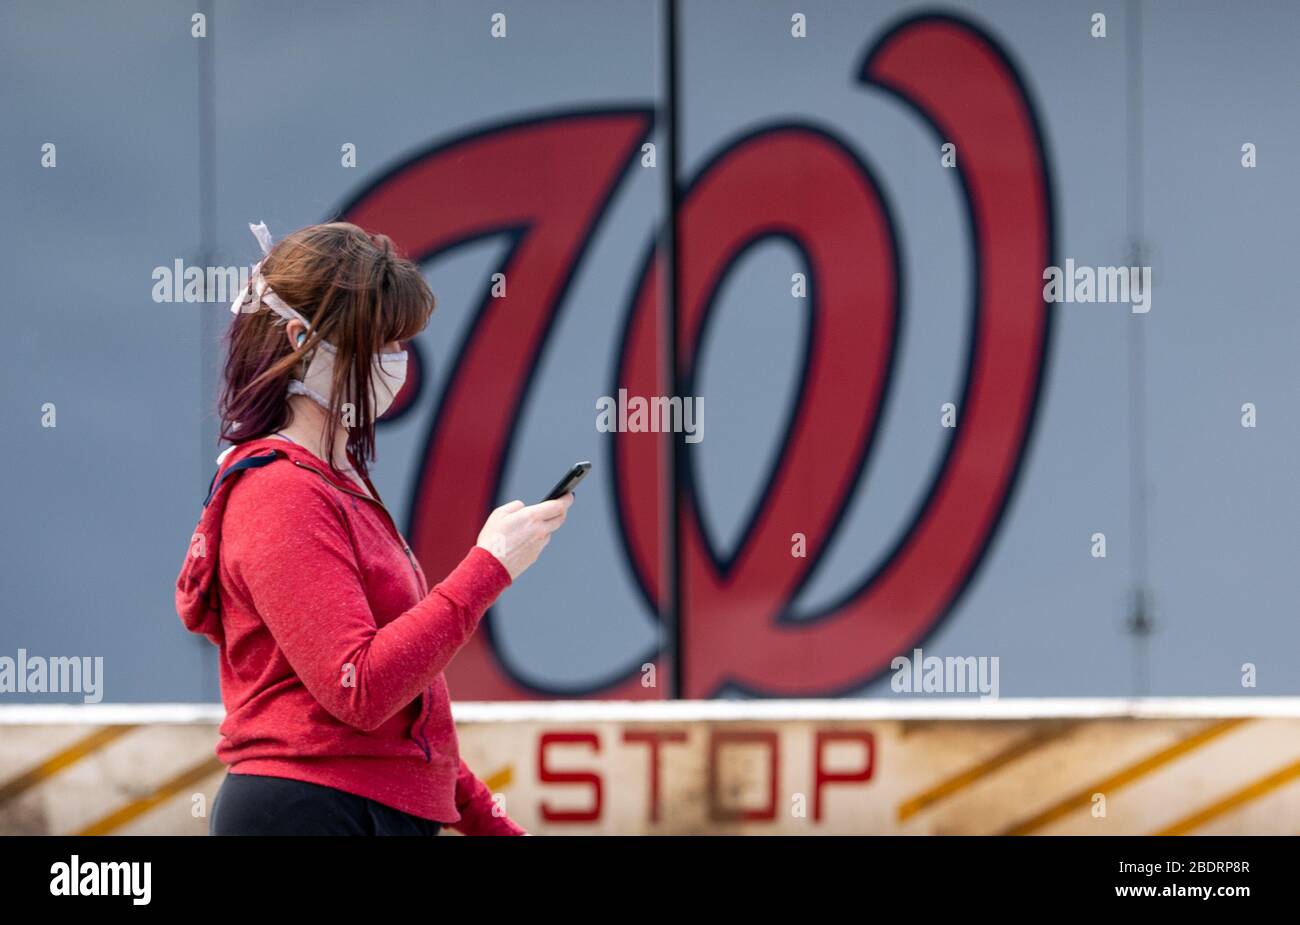 Washington, United States. 09th Apr, 2020. A person wearing a mask walks past a Washington Nationals logo at Nationals Park in Washington, DC on Thursday, April 9, 2020. World Central Kitchen is using Nationals Park to prepare and distribute food to agencies that help needed individuals during the Coronavirus pandemic. Photo by Kevin Dietsch/UPI Credit: UPI/Alamy Live News Stock Photo